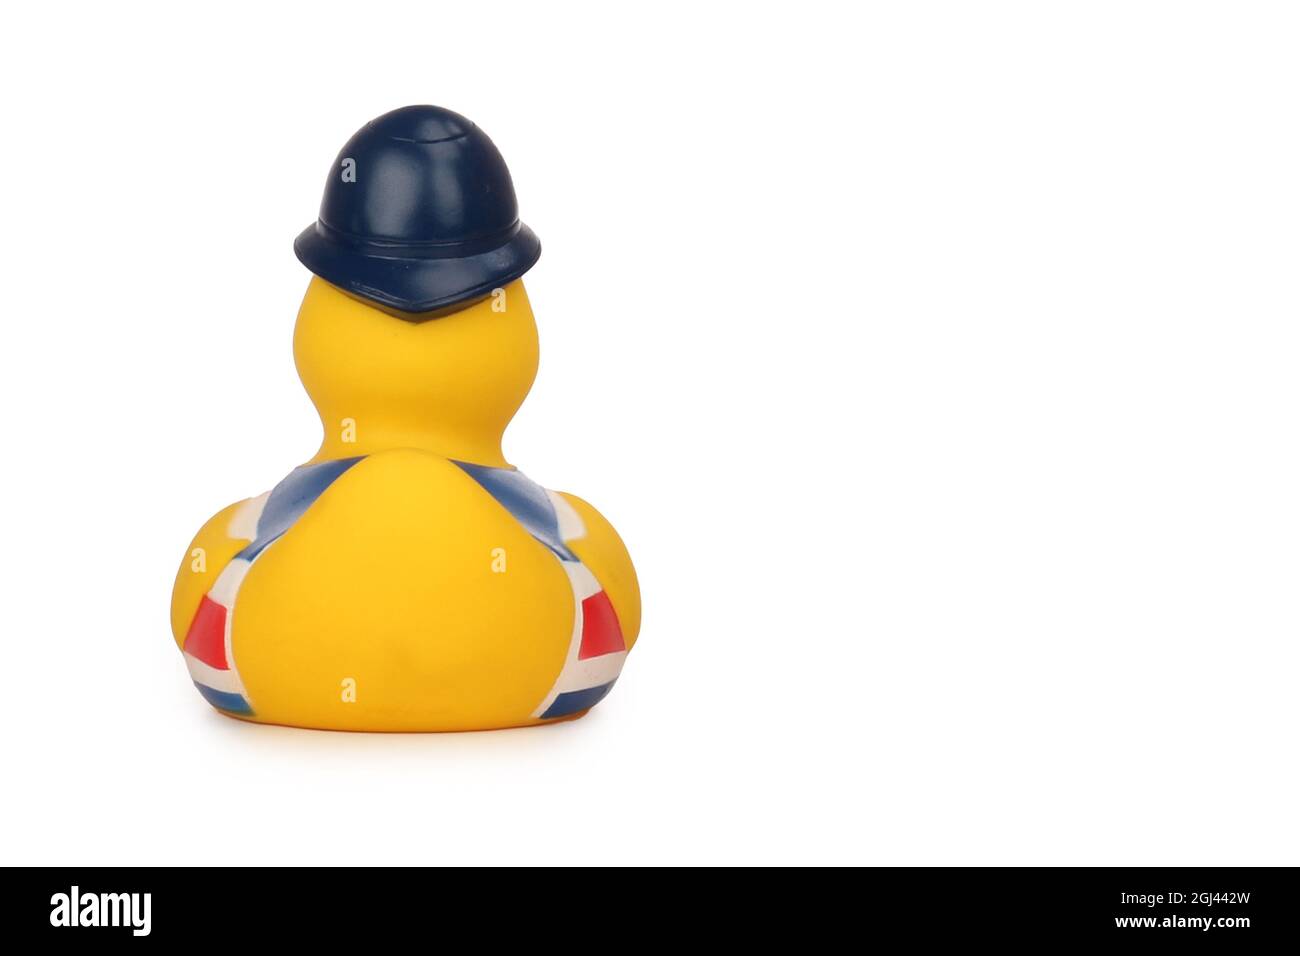 Back view of a bath toy duck with the British flag isolated on a white background Stock Photo